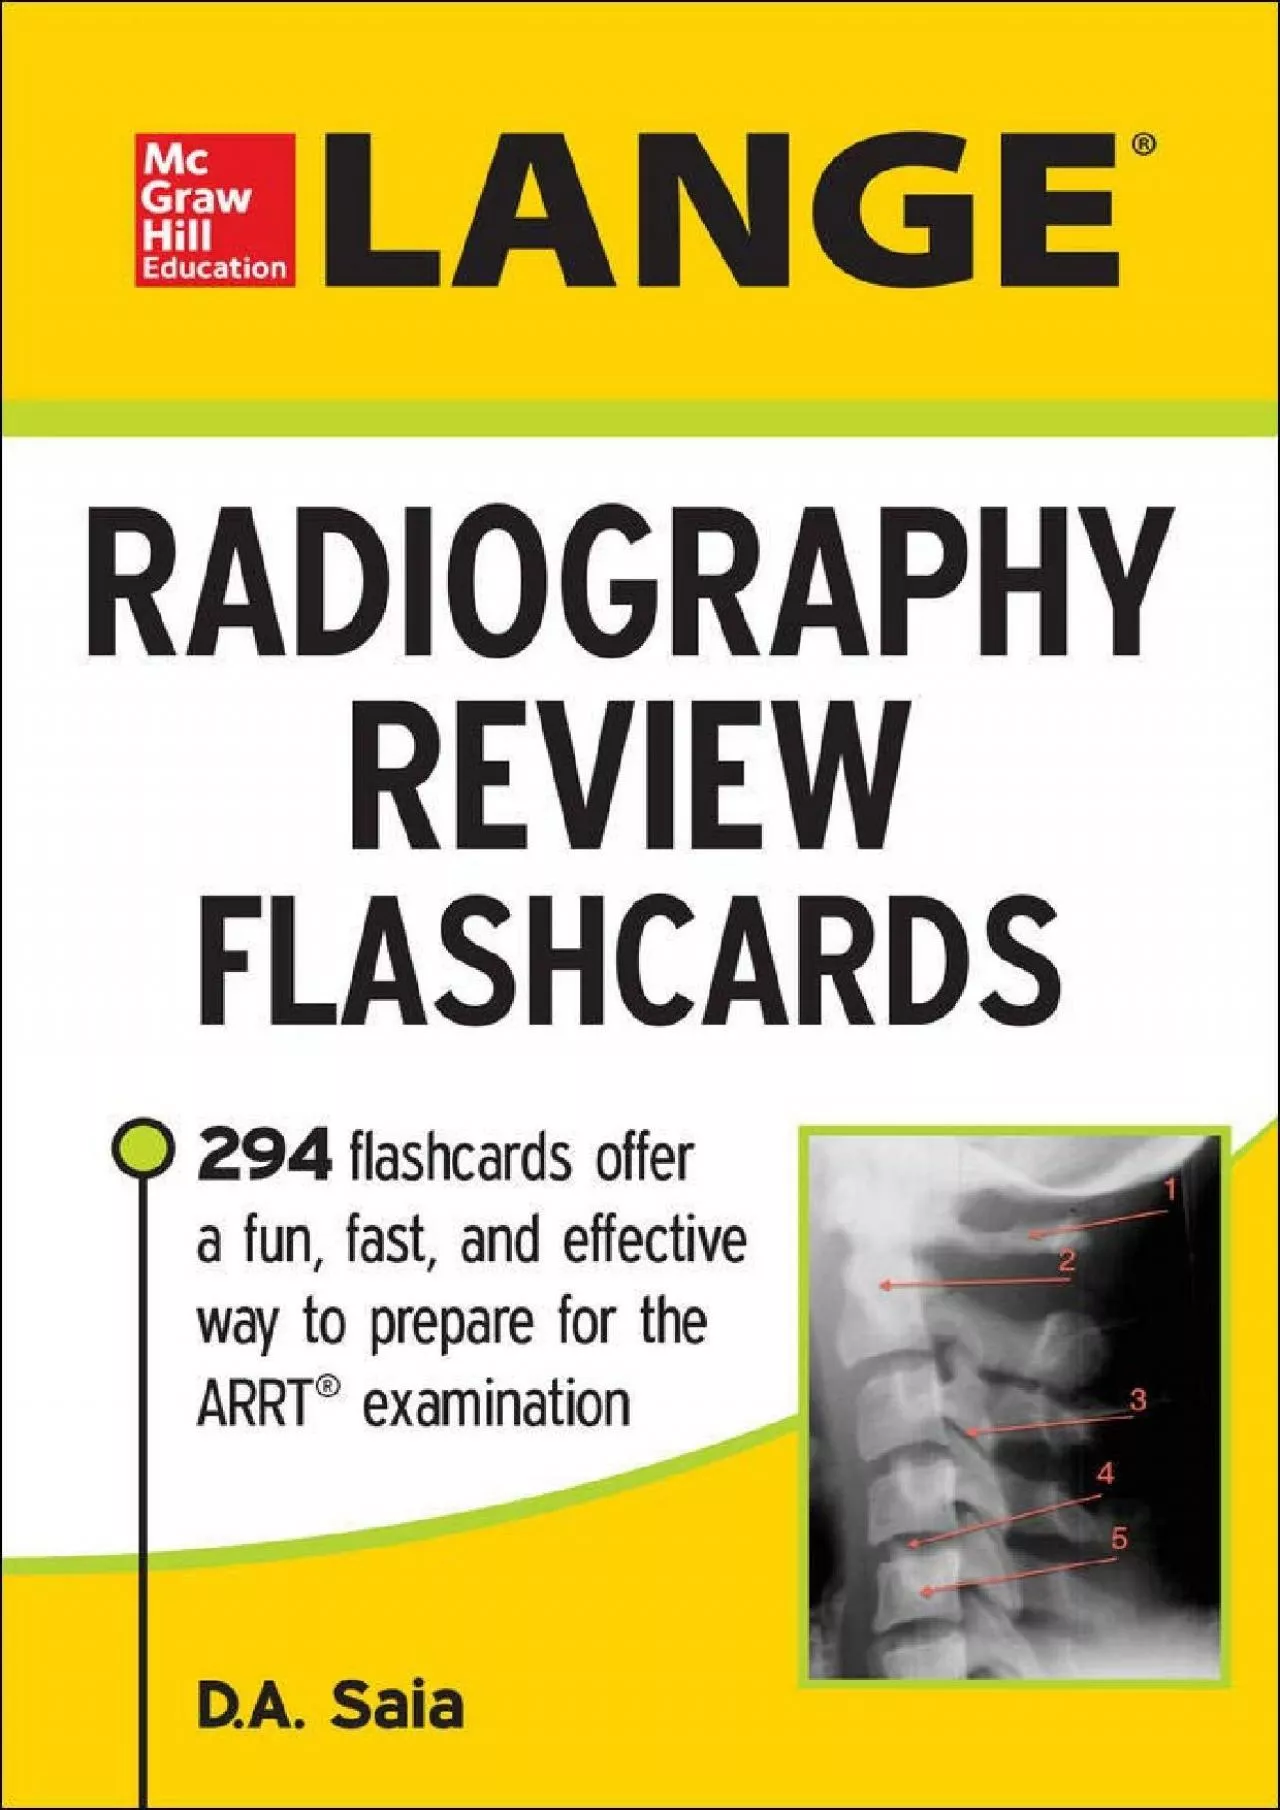 [DOWNLOAD] LANGE Radiography Review Flashcards